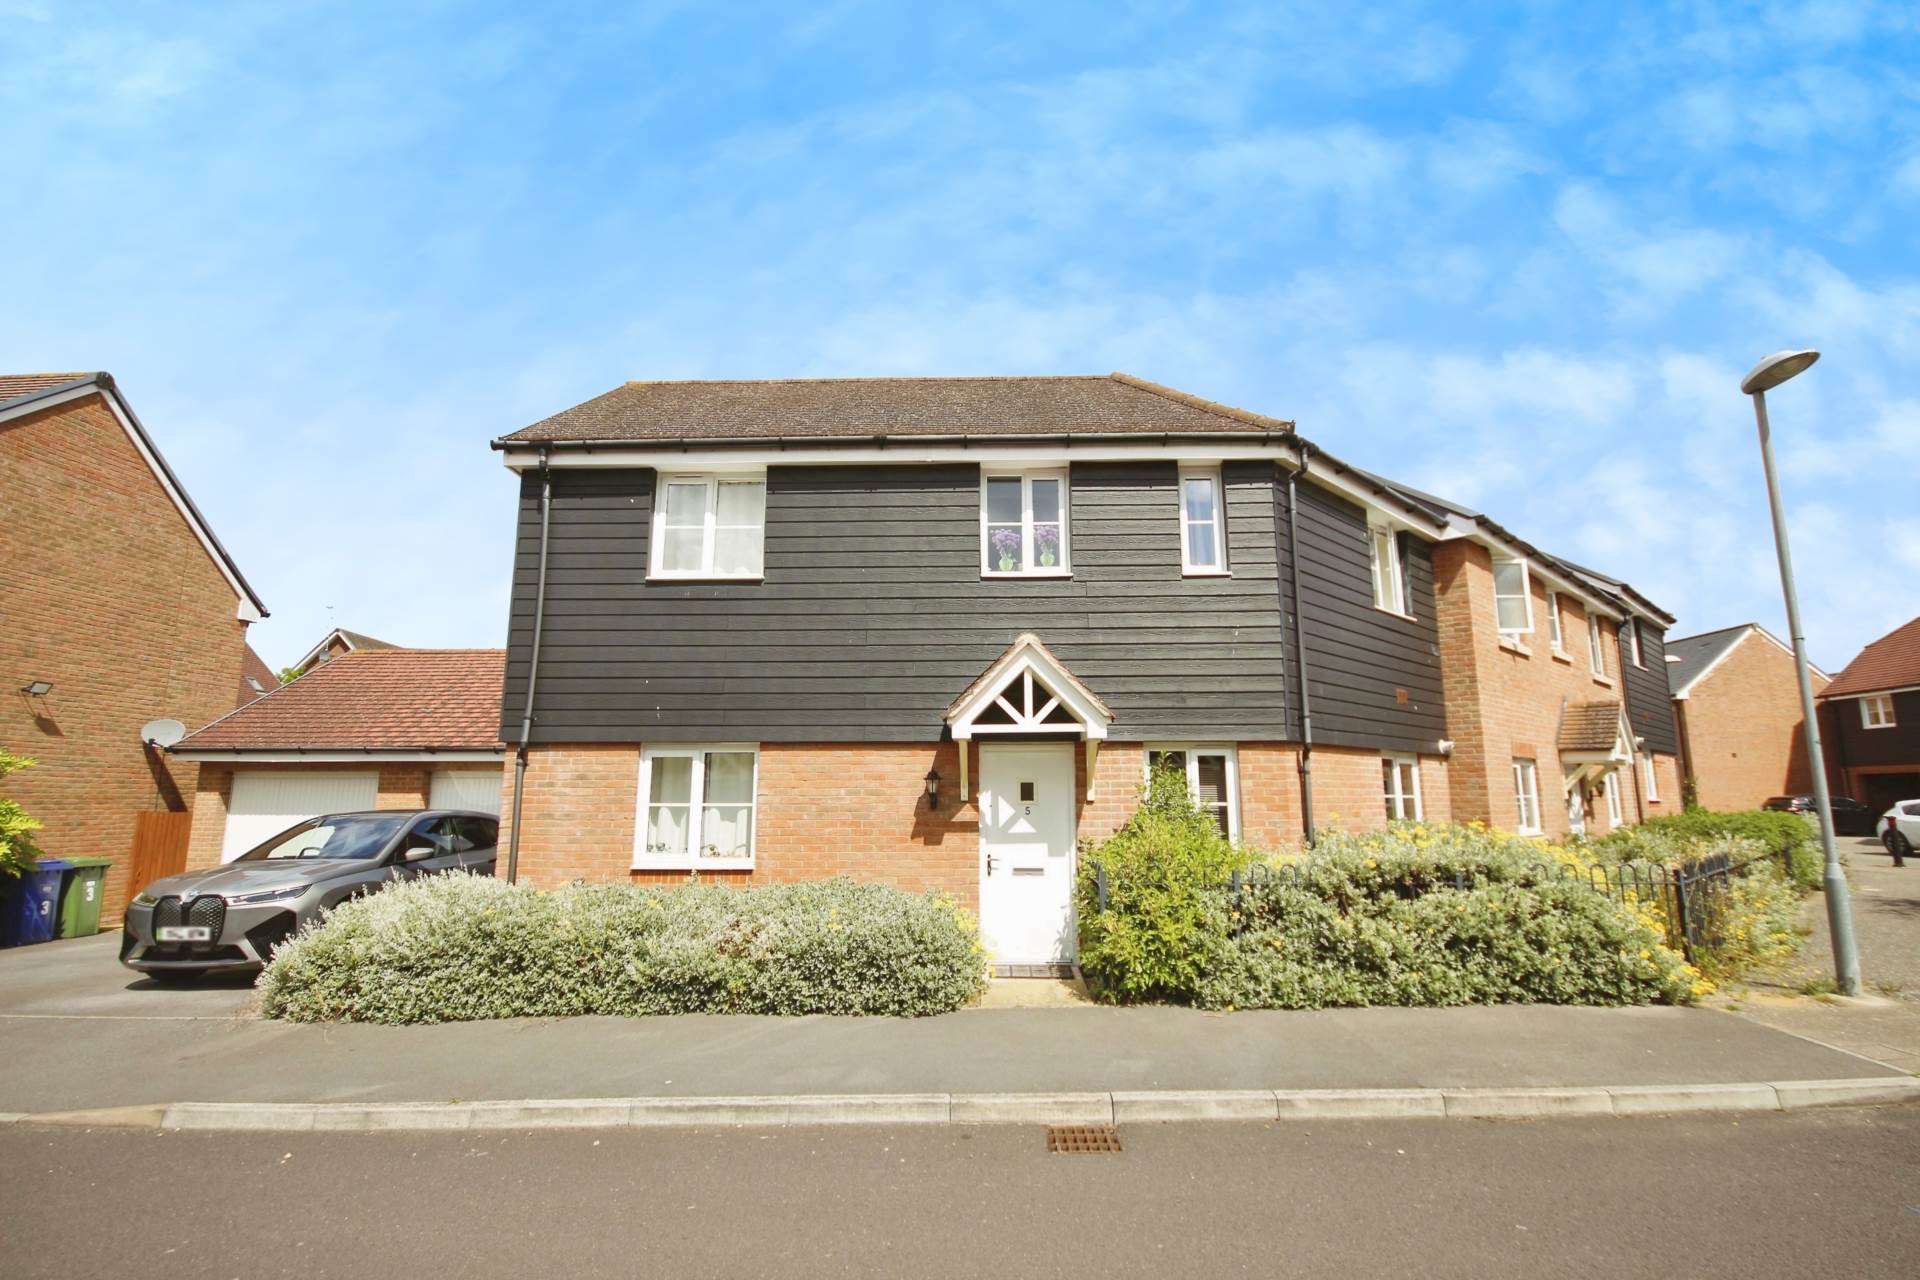 3 bed Semi-Detached House for rent in Bracknell. From Sears Property - Bracknell